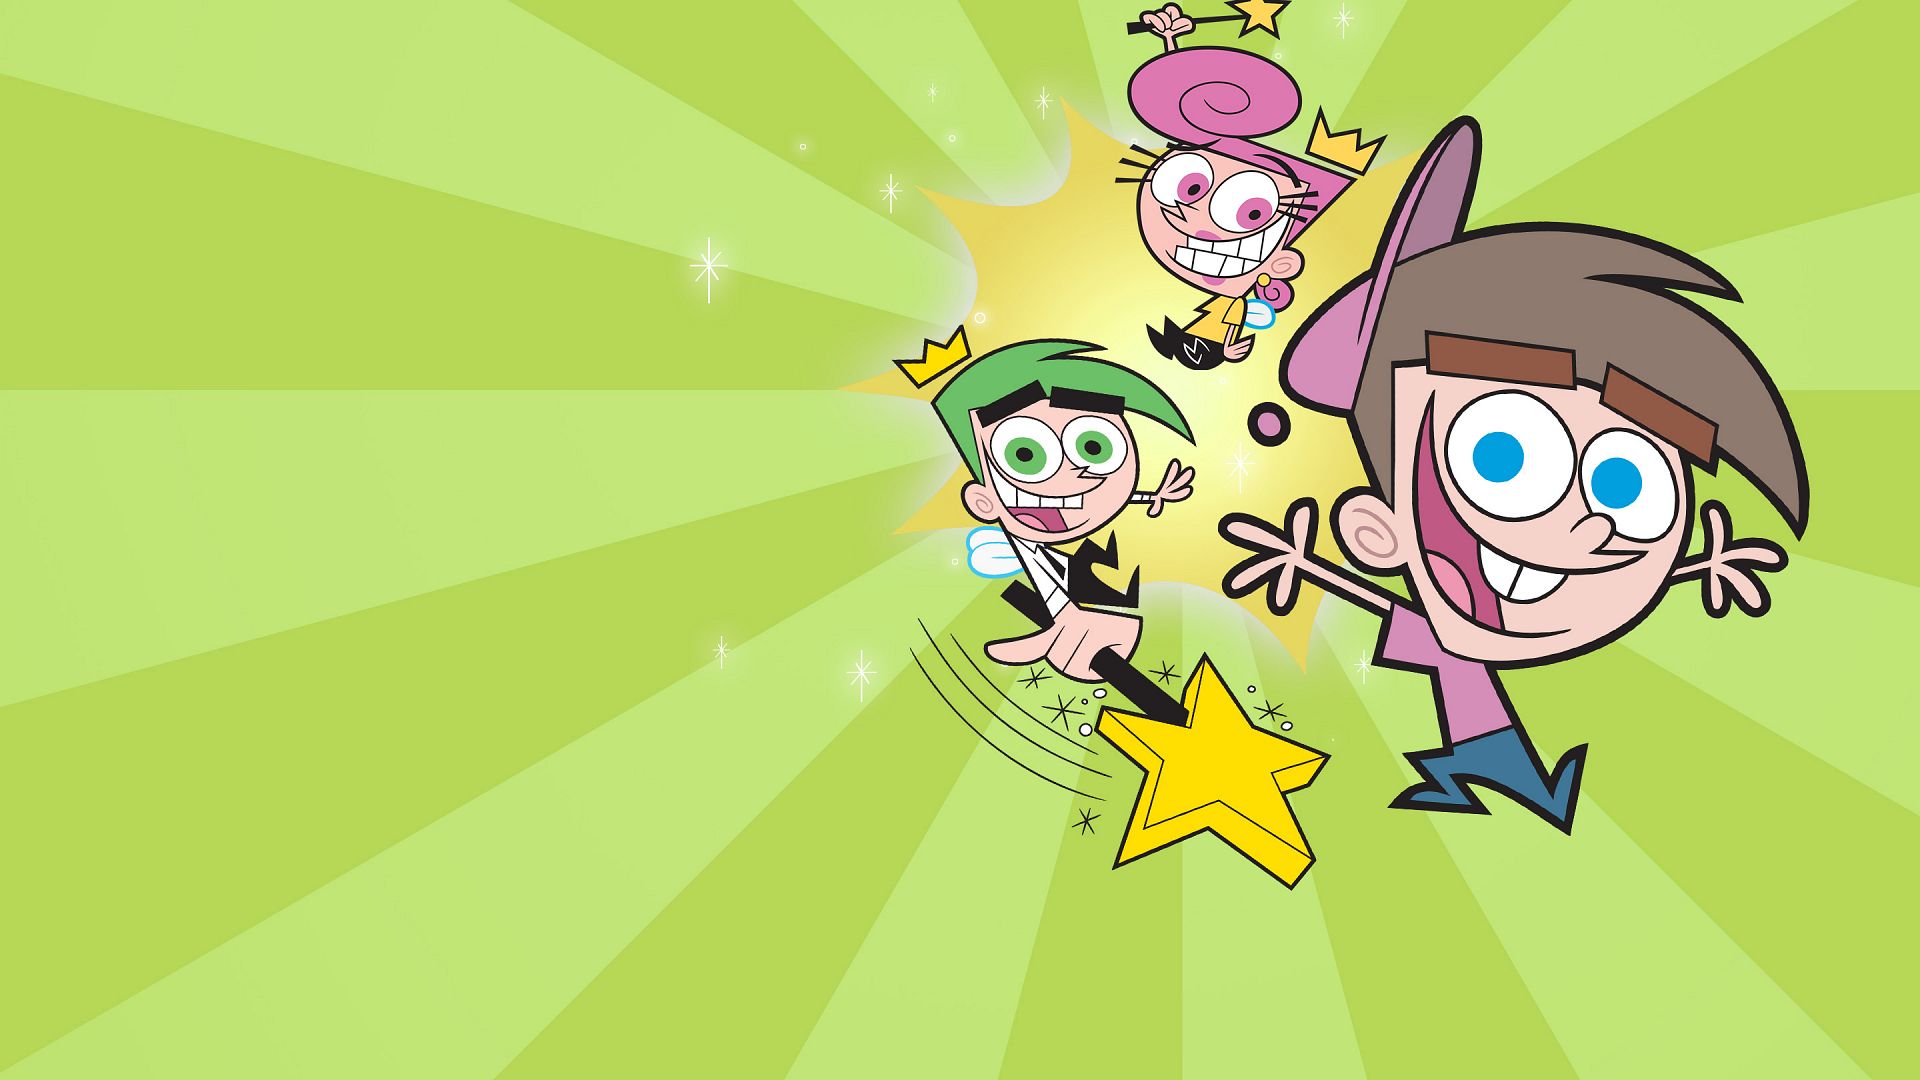 What we know about "The Fairly Odd Parents" live action reboot.